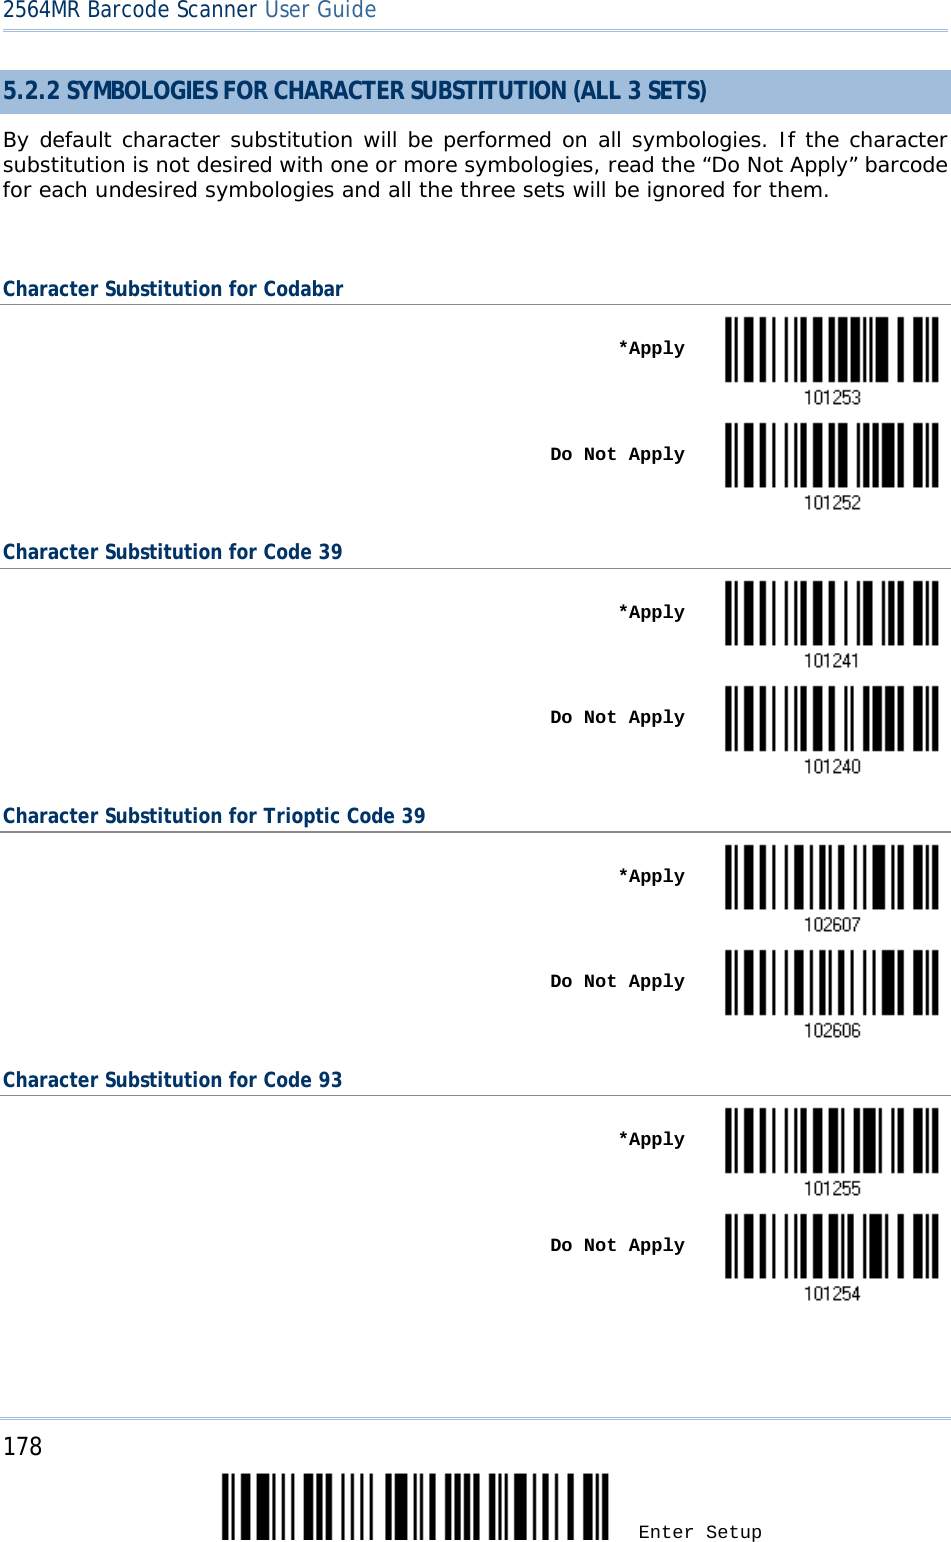 2564MR Barcode Scanner User Guide  5.2.2 SYMBOLOGIES FOR CHARACTER SUBSTITUTION (ALL 3 SETS) By default character substitution will be performed on all symbologies. If the character substitution is not desired with one or more symbologies, read the “Do Not Apply” barcode for each undesired symbologies and all the three sets will be ignored for them.  Character Substitution for Codabar    *Apply     Do Not Apply  Character Substitution for Code 39    *Apply     Do Not Apply  Character Substitution for Trioptic Code 39    *Apply     Do Not Apply  Character Substitution for Code 93    *Apply     Do Not Apply     178 Enter Setup 